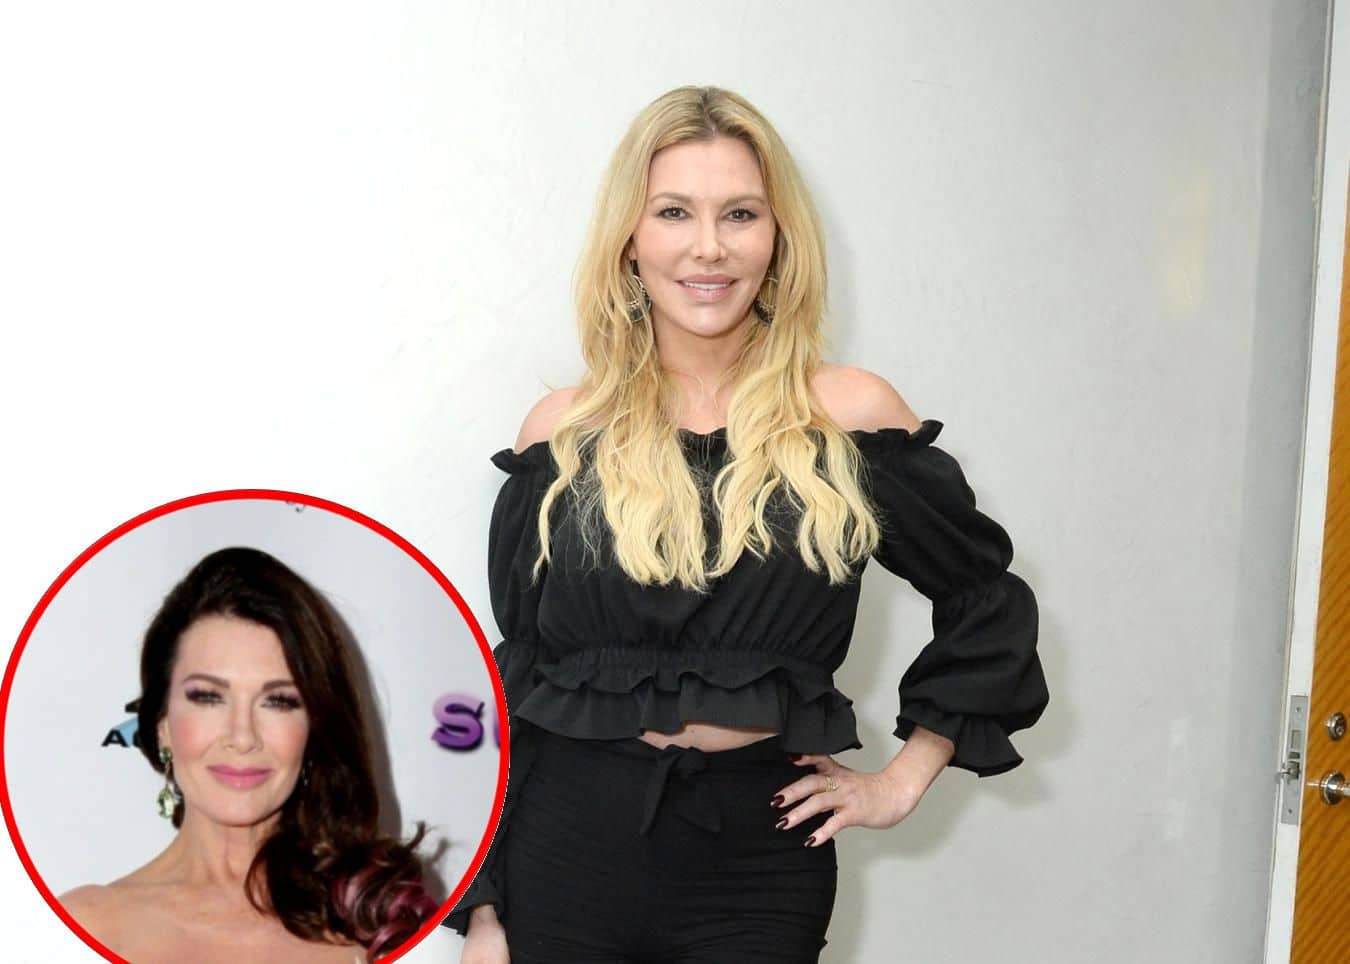 Brandi Glanville Talks Being a ‘Happy Drunk’ Before RHUGT Scandal, Shares How LVP Ruined Her Life and Last Text Message to Former RHOBH Costar, Plus Claims She’s Owed $560K